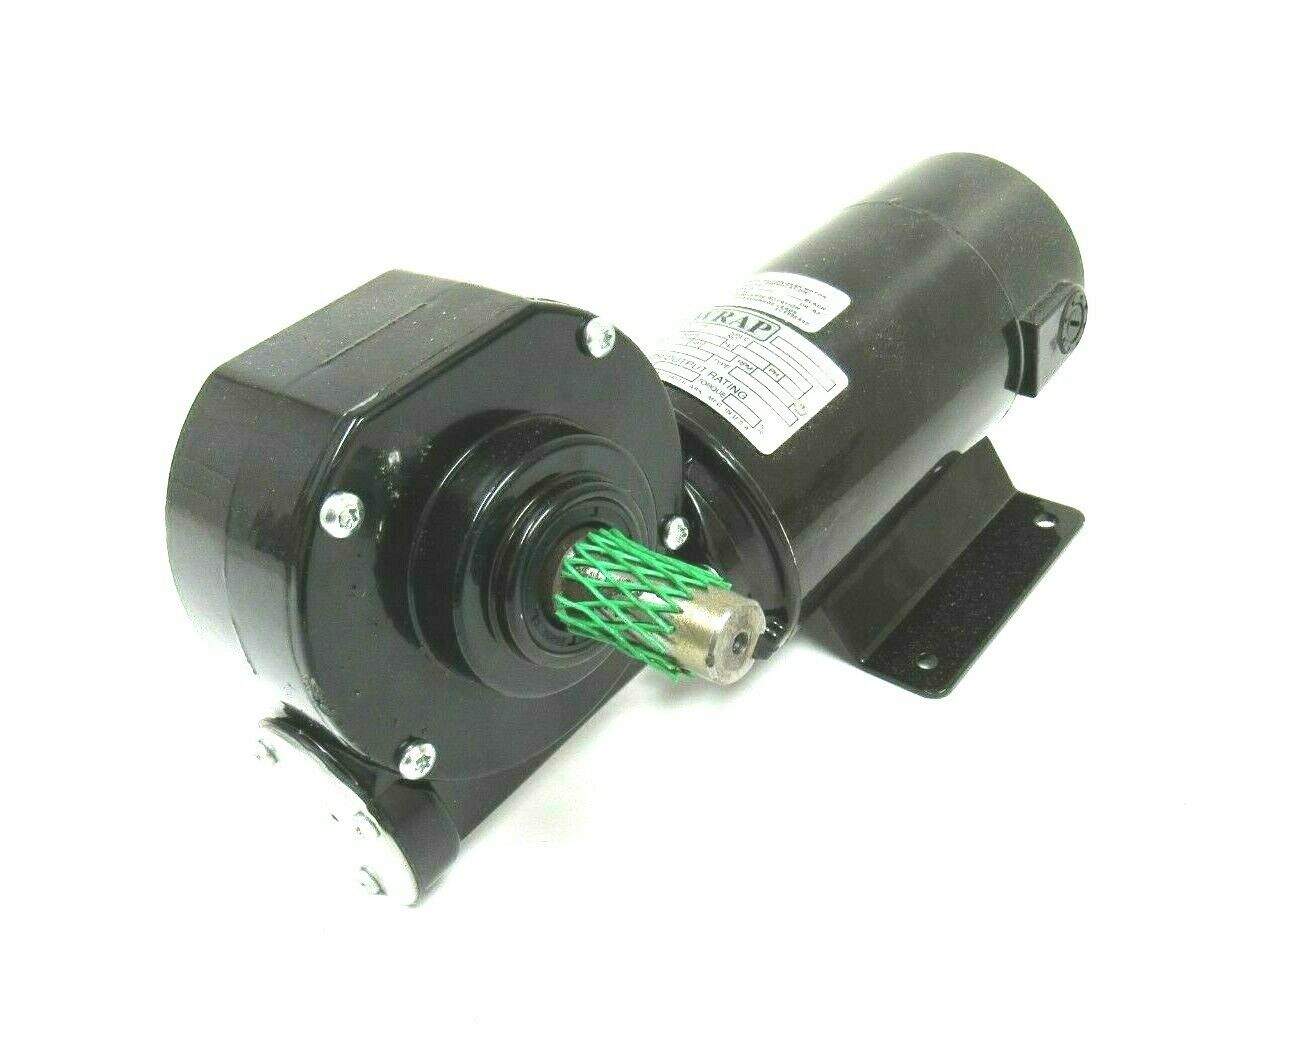 Details about   Baldor 23A657Z151G1 Motor .1HP Ratio 72:1 NEW 